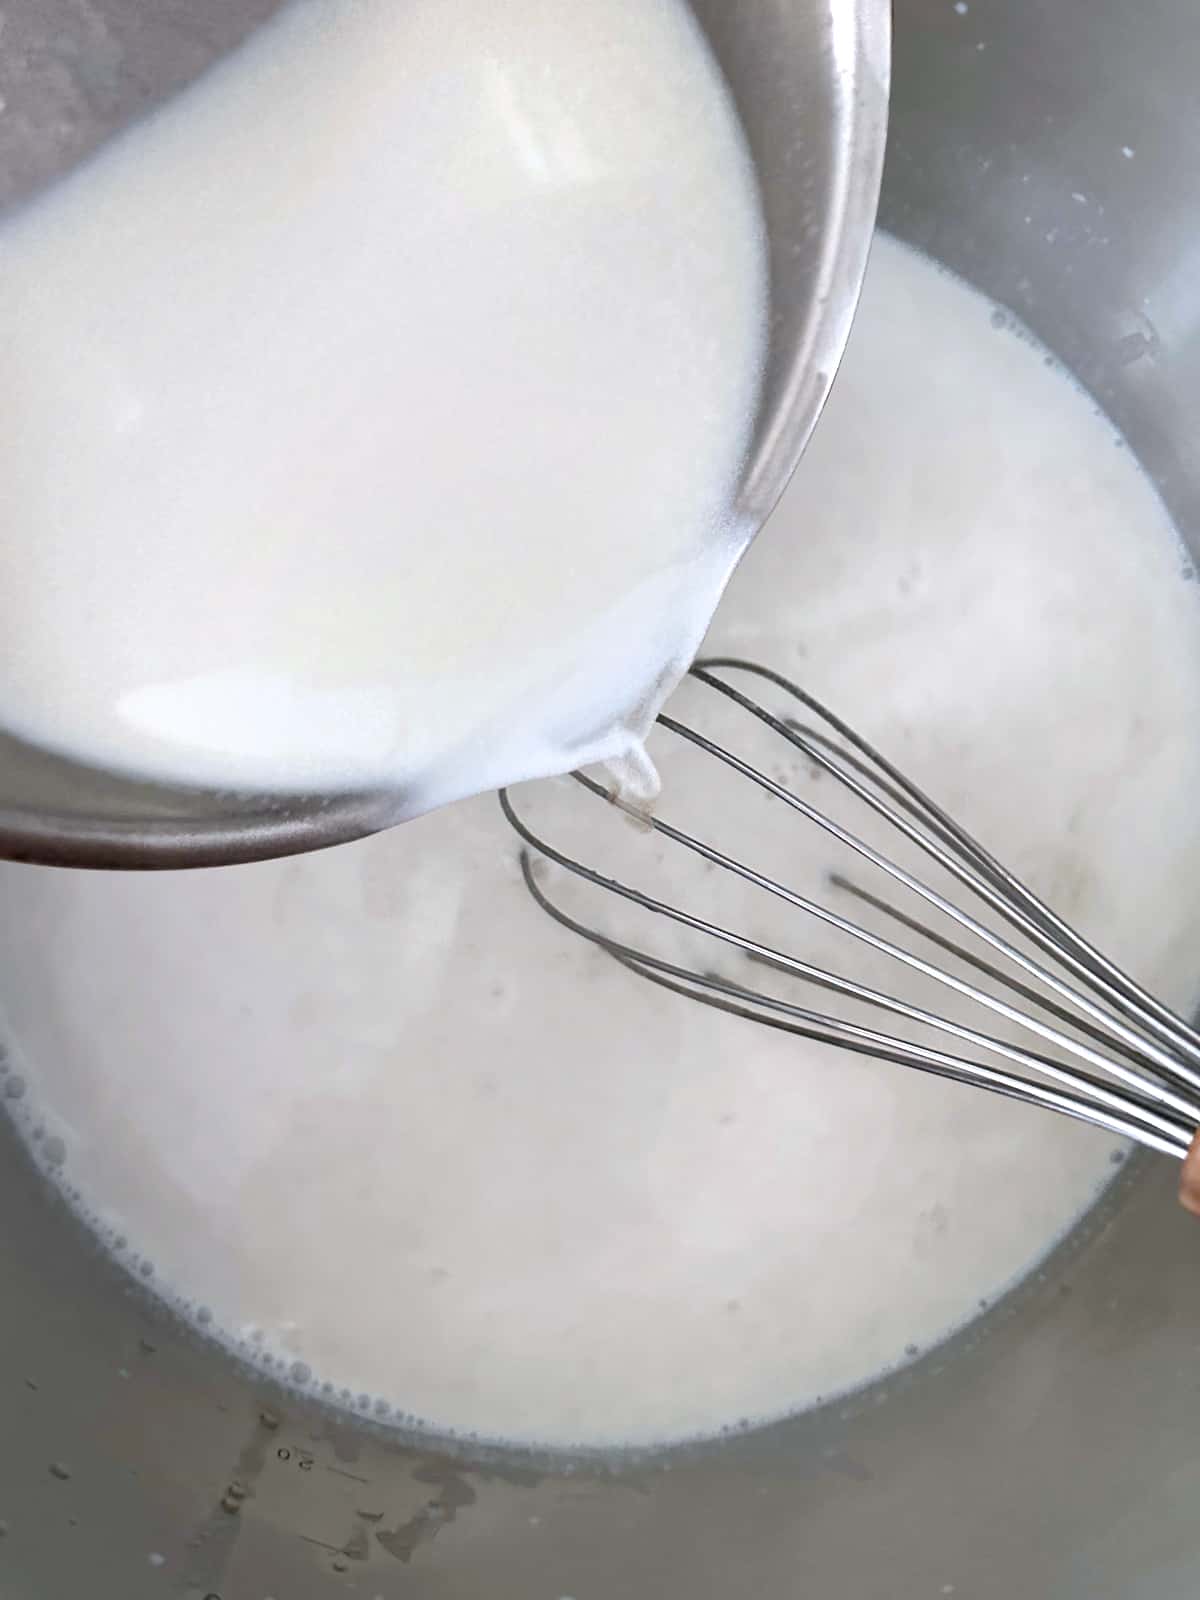 A saucepan with milk poured into white sauce and a whisk.